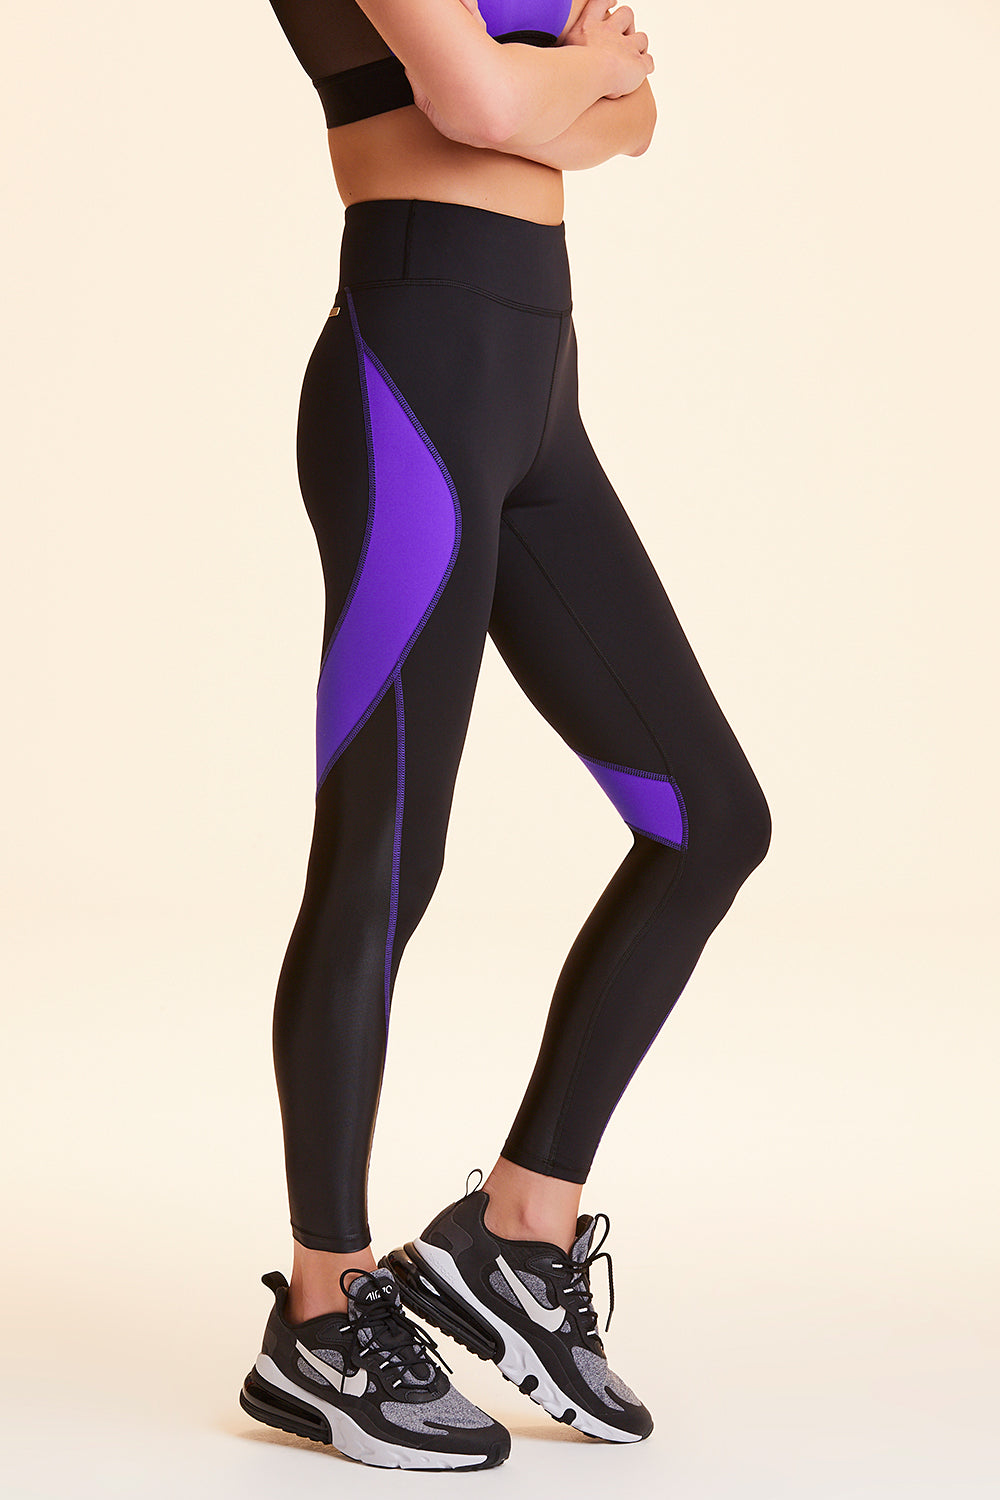 Side view of Alala Women's Luxury Athleisure black and purple color-blocked tight